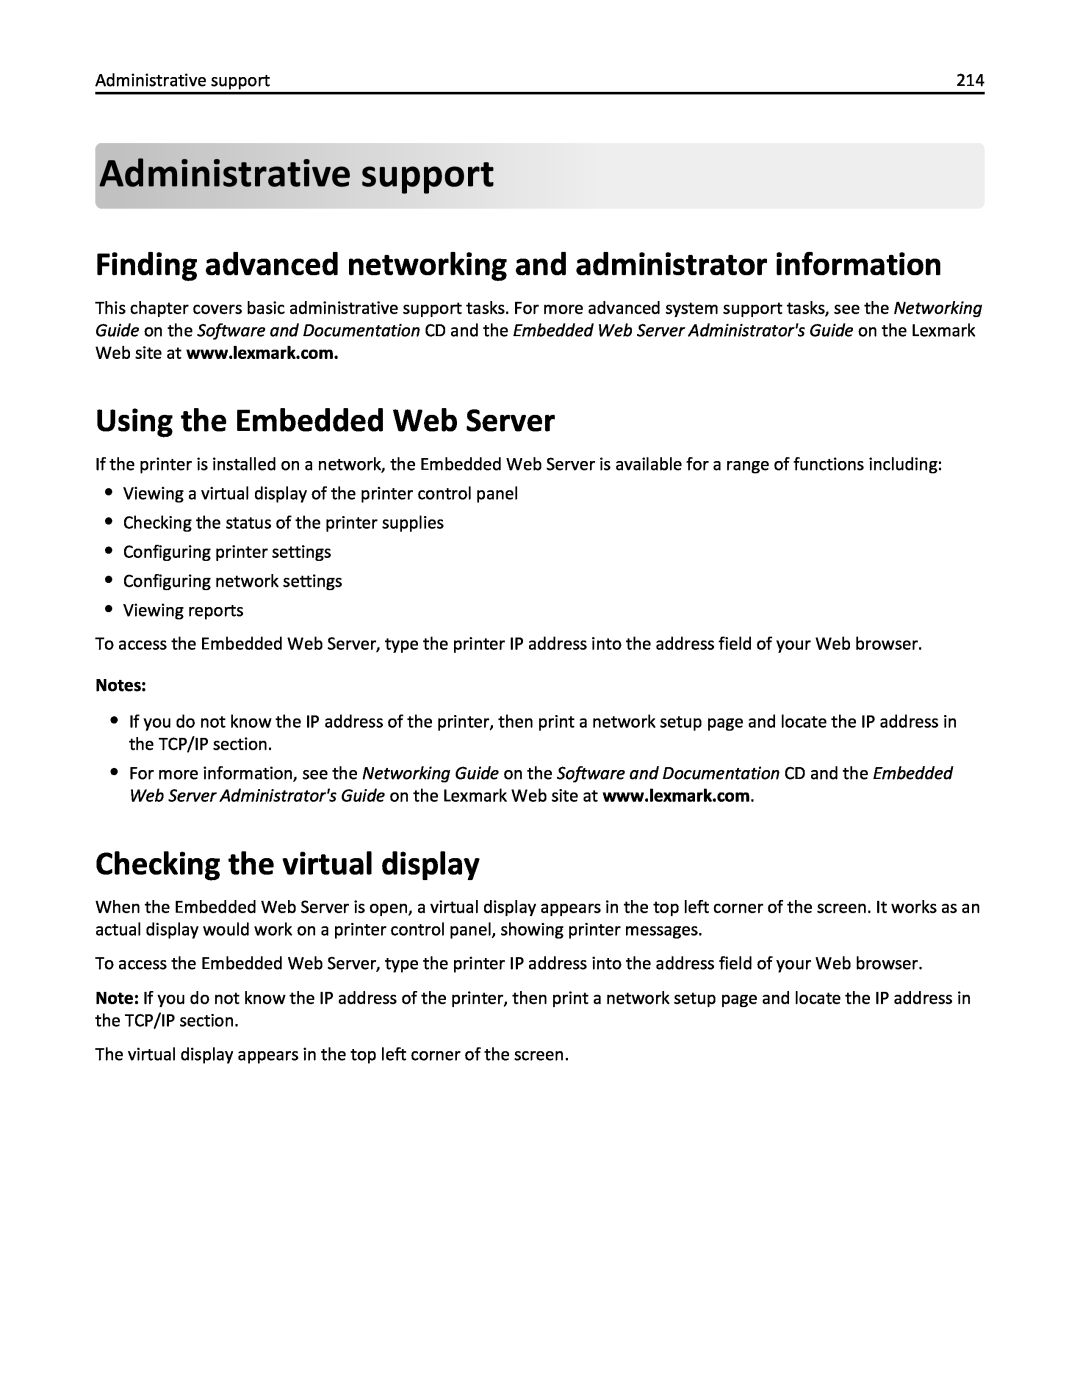 Lexmark X862DE, 432, 19Z0101, 632, 832 manual Administrativesupport, Finding advanced networking and administrator information 